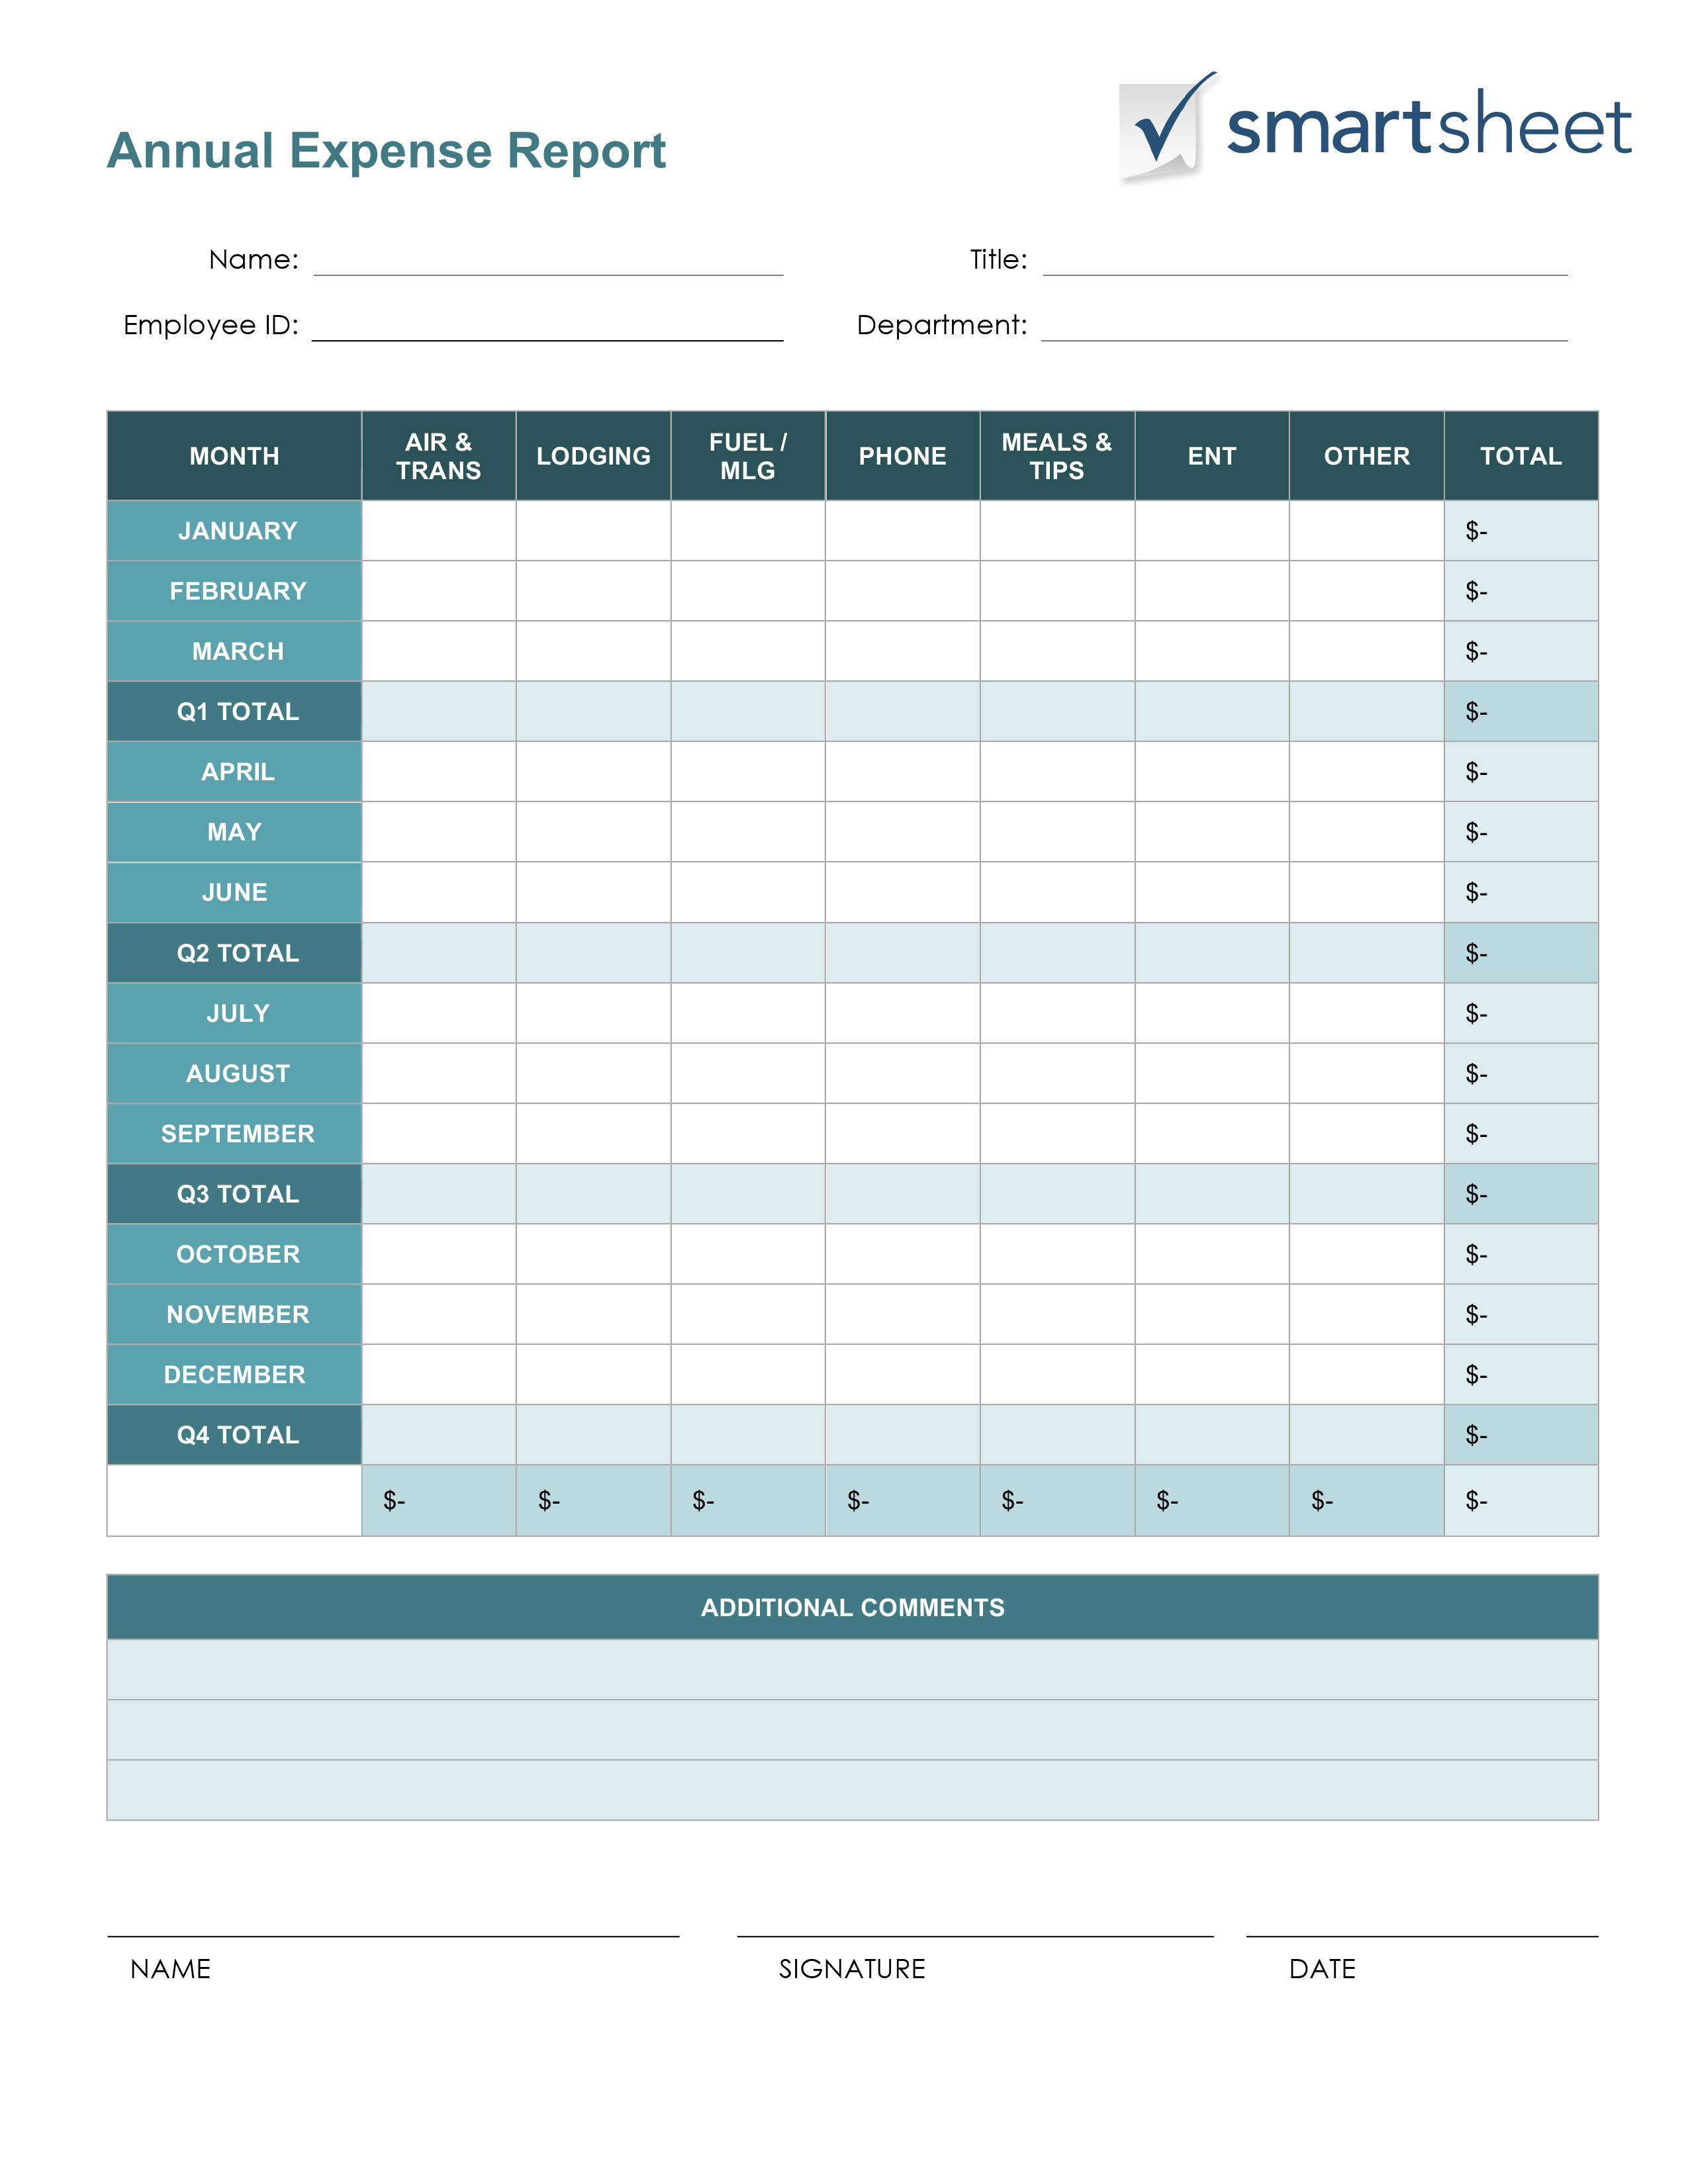 Free Expense Report Templates Smartsheet Within Business Travel Expense Template